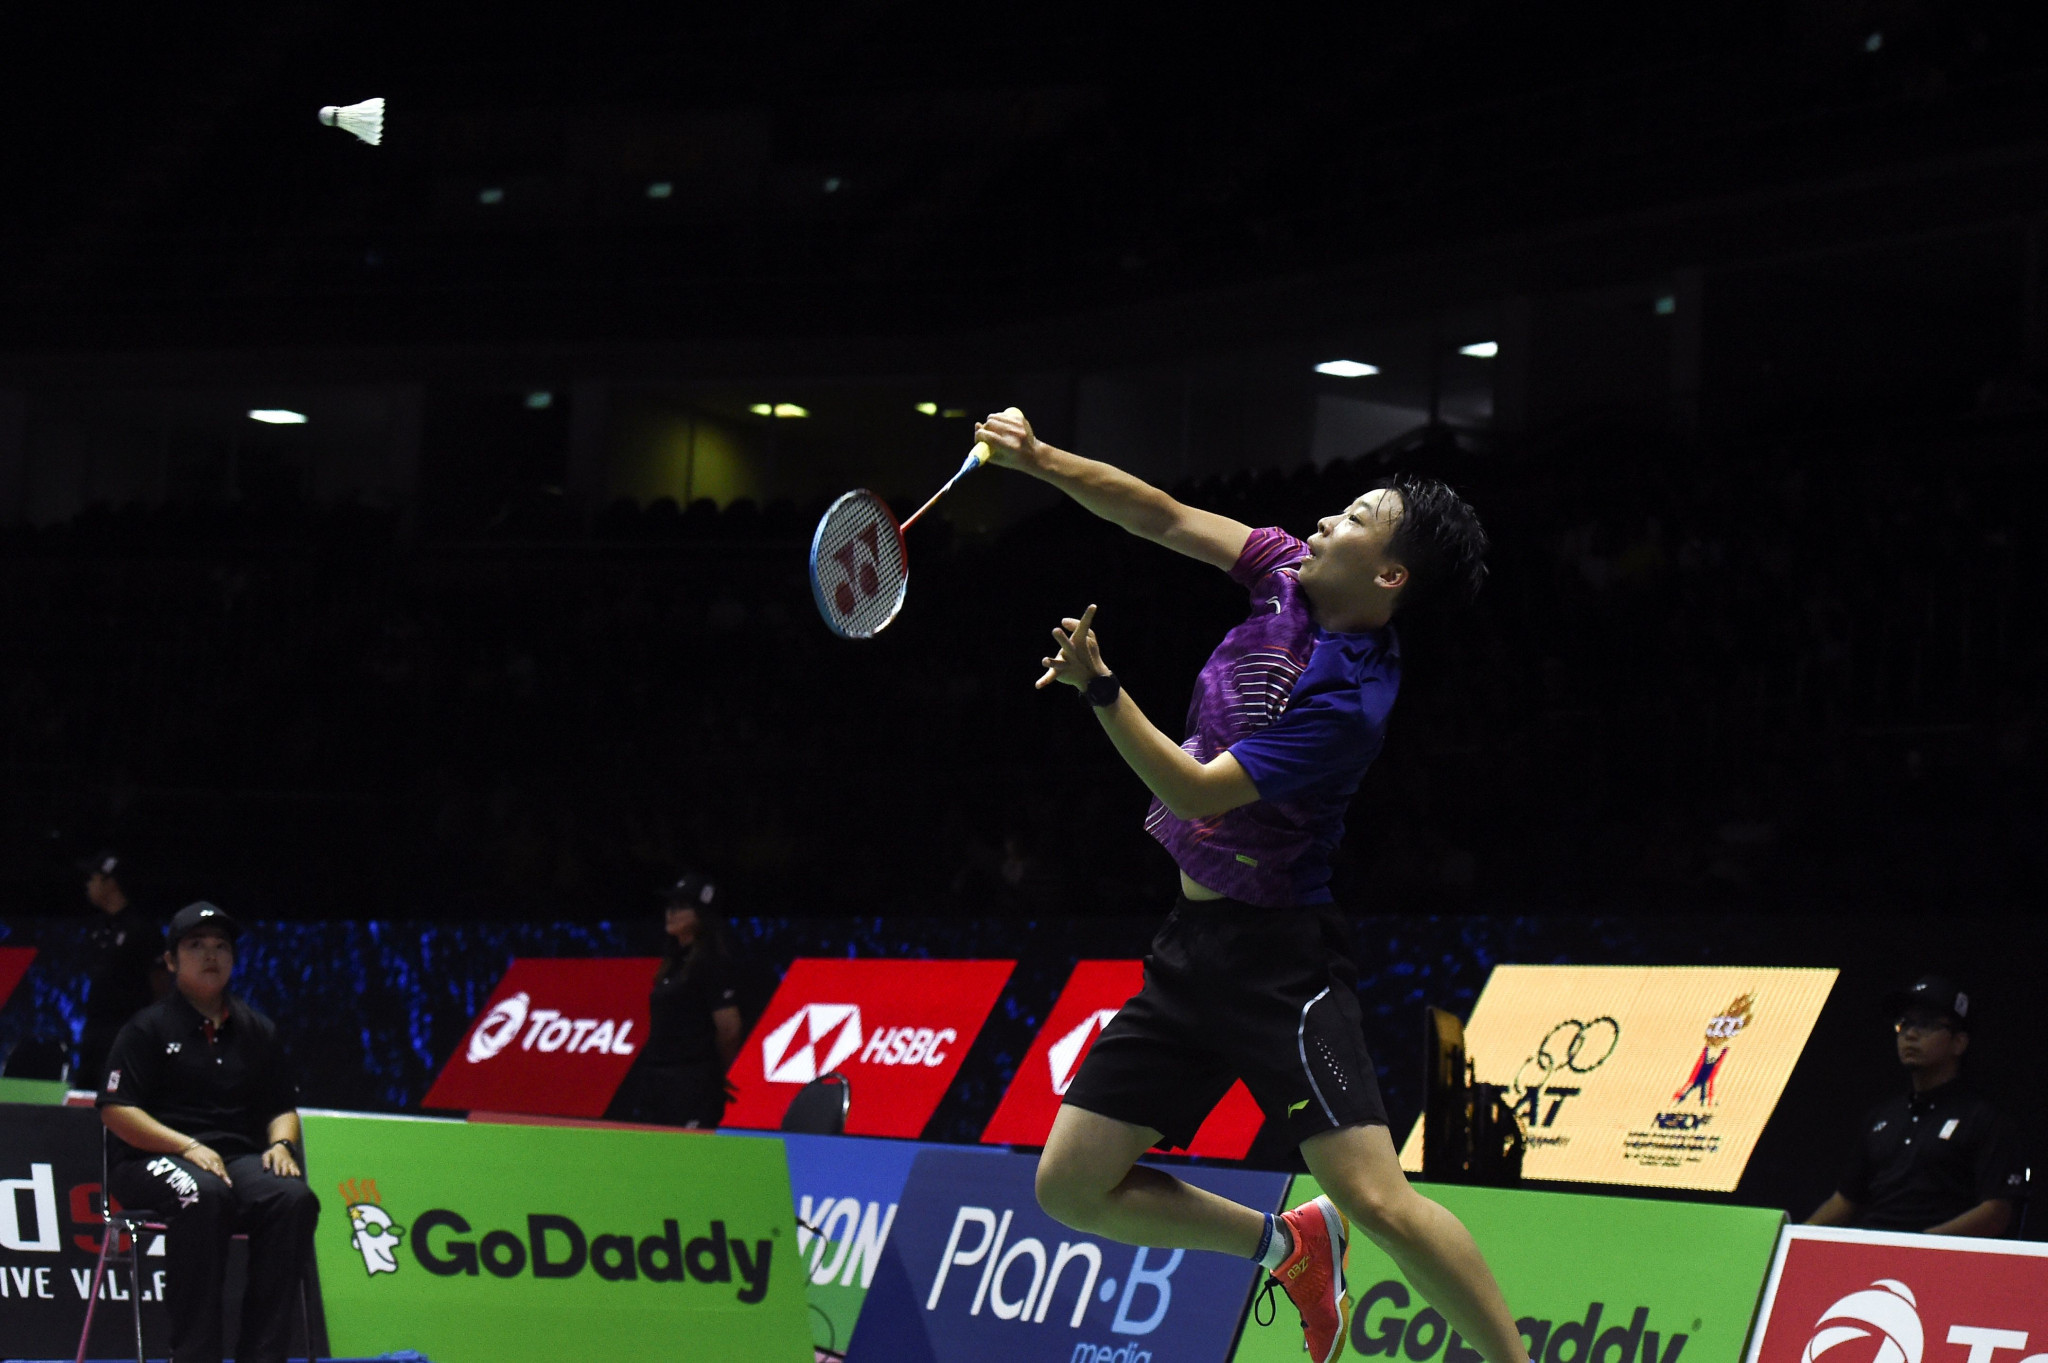 Chen Hsuan-yu is set to defend her title in front of a home crowd at the Oceania Badminton Championships ©Getty Images